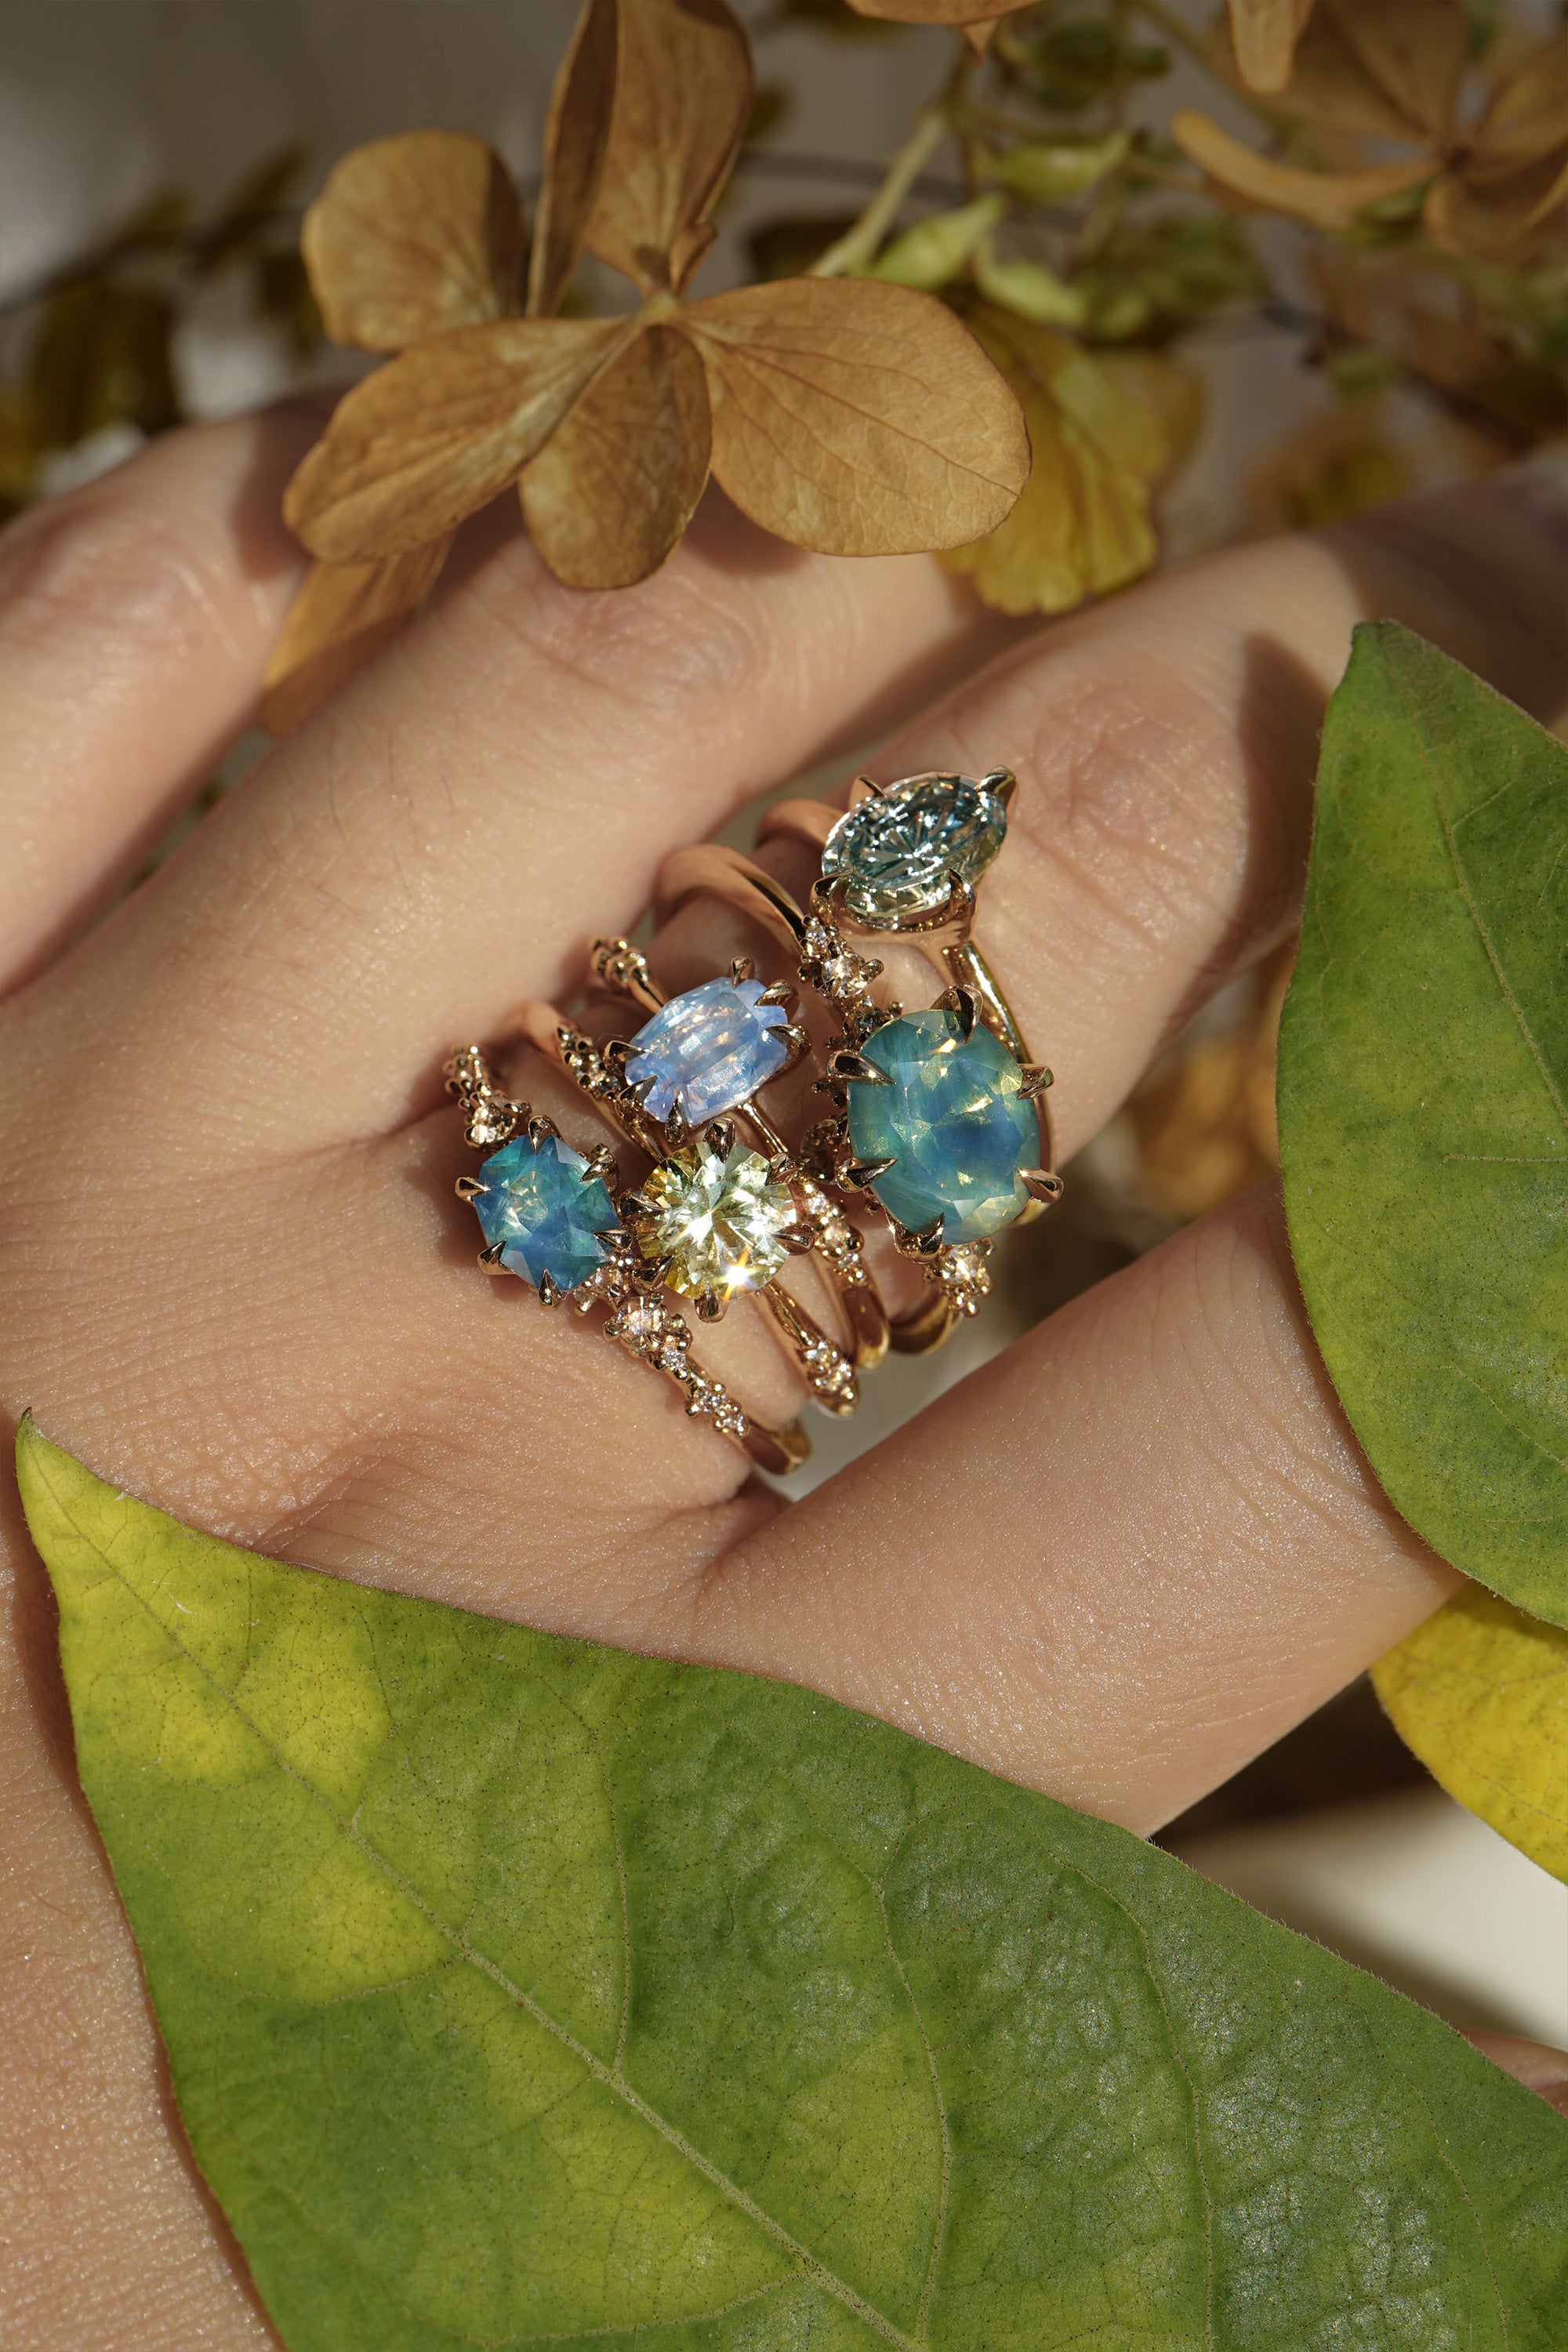 Five one of a kind engagement rings by Laurie Fleming Jewellery worn on a hand, with plants in the fore and background. From left to right: a Nereid ring with an opalescent geometric cut blue-green teal sapphire and diamonds on the band, an Ilona ring with a yellow-grey round brilliant cut sapphire, an Ilona ring with a light periwinkle blue oval cut sapphire, a Nereid ring with a silky opalescent teal oval sapphire, and a Moondew ring with a colour change Starbrite cut sapphire by John Dyer.